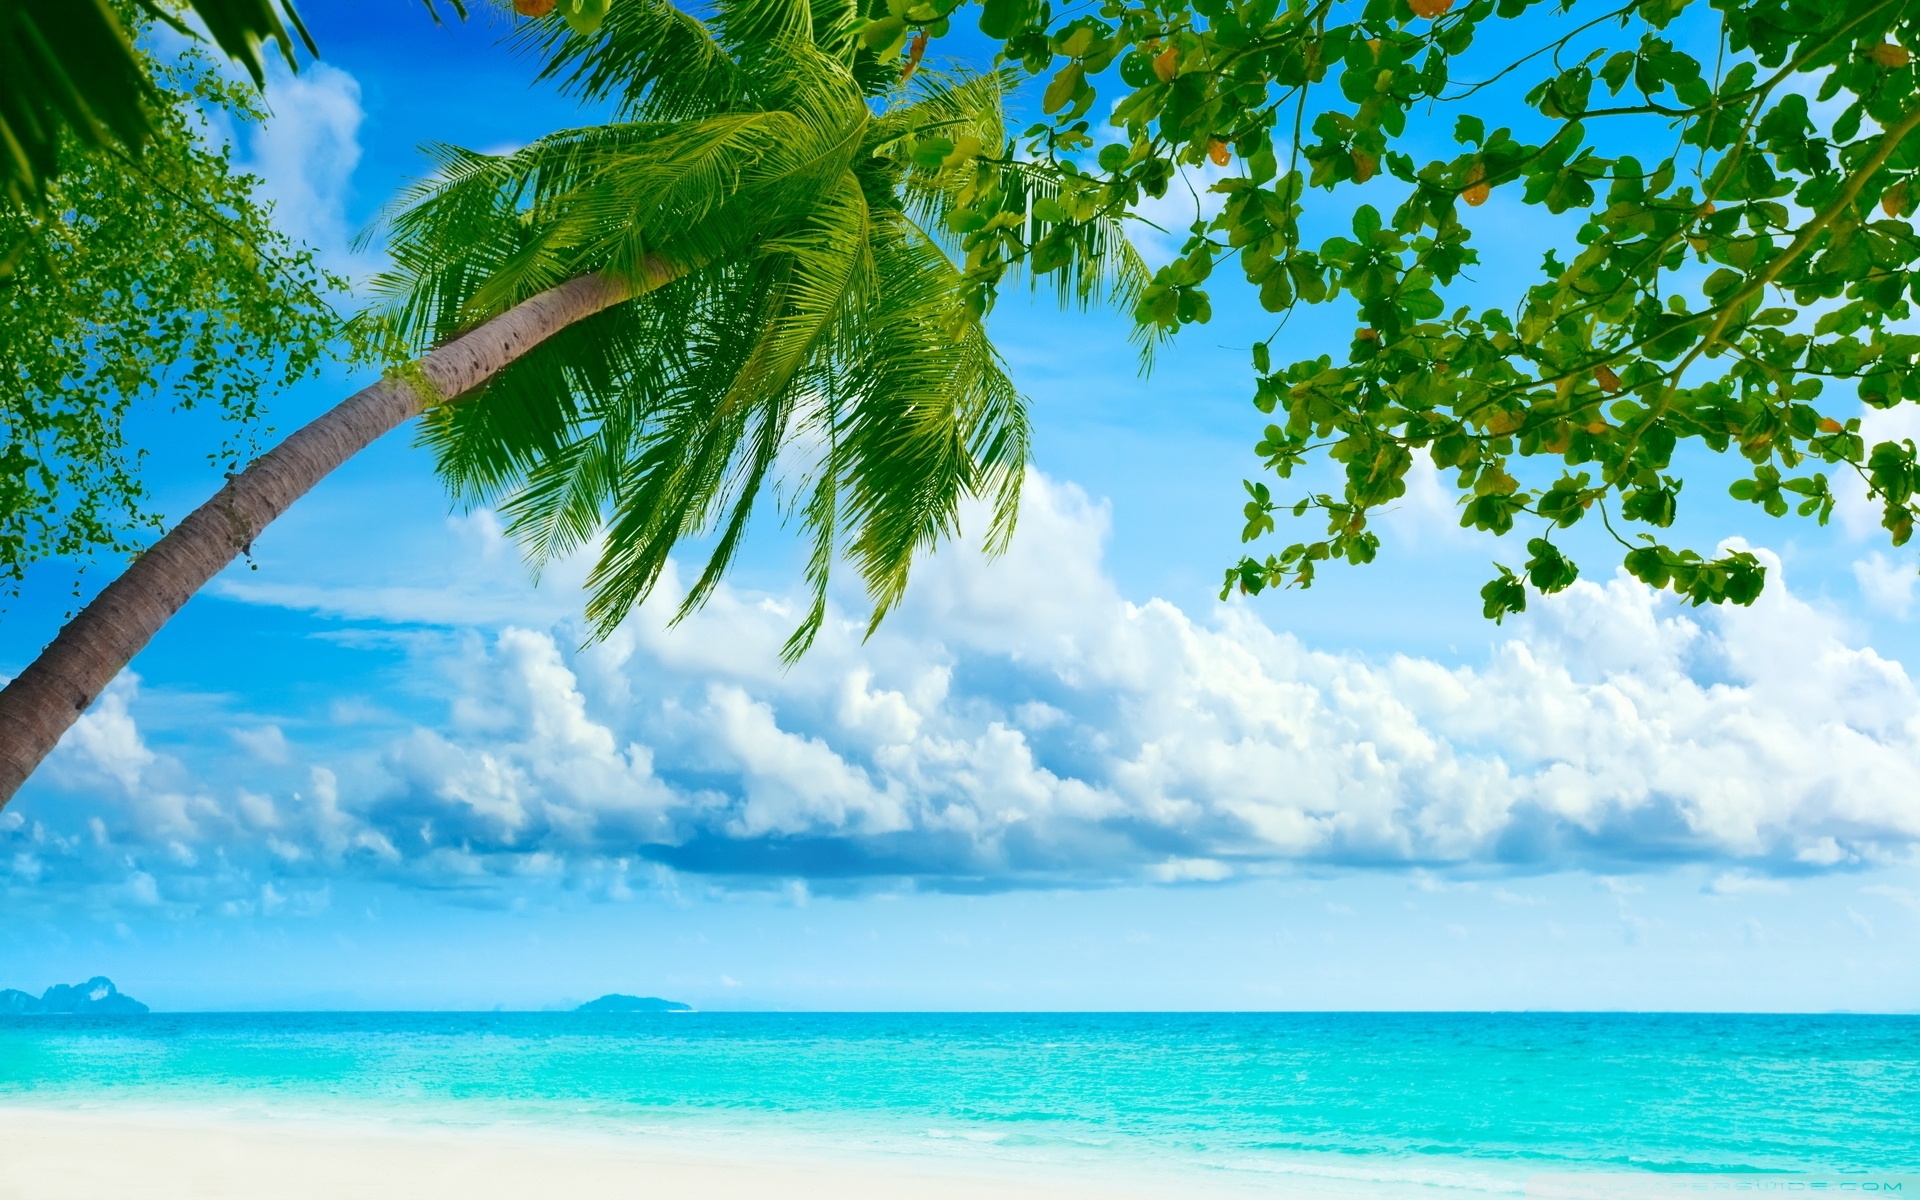 Beach Hd Image Wallpapers